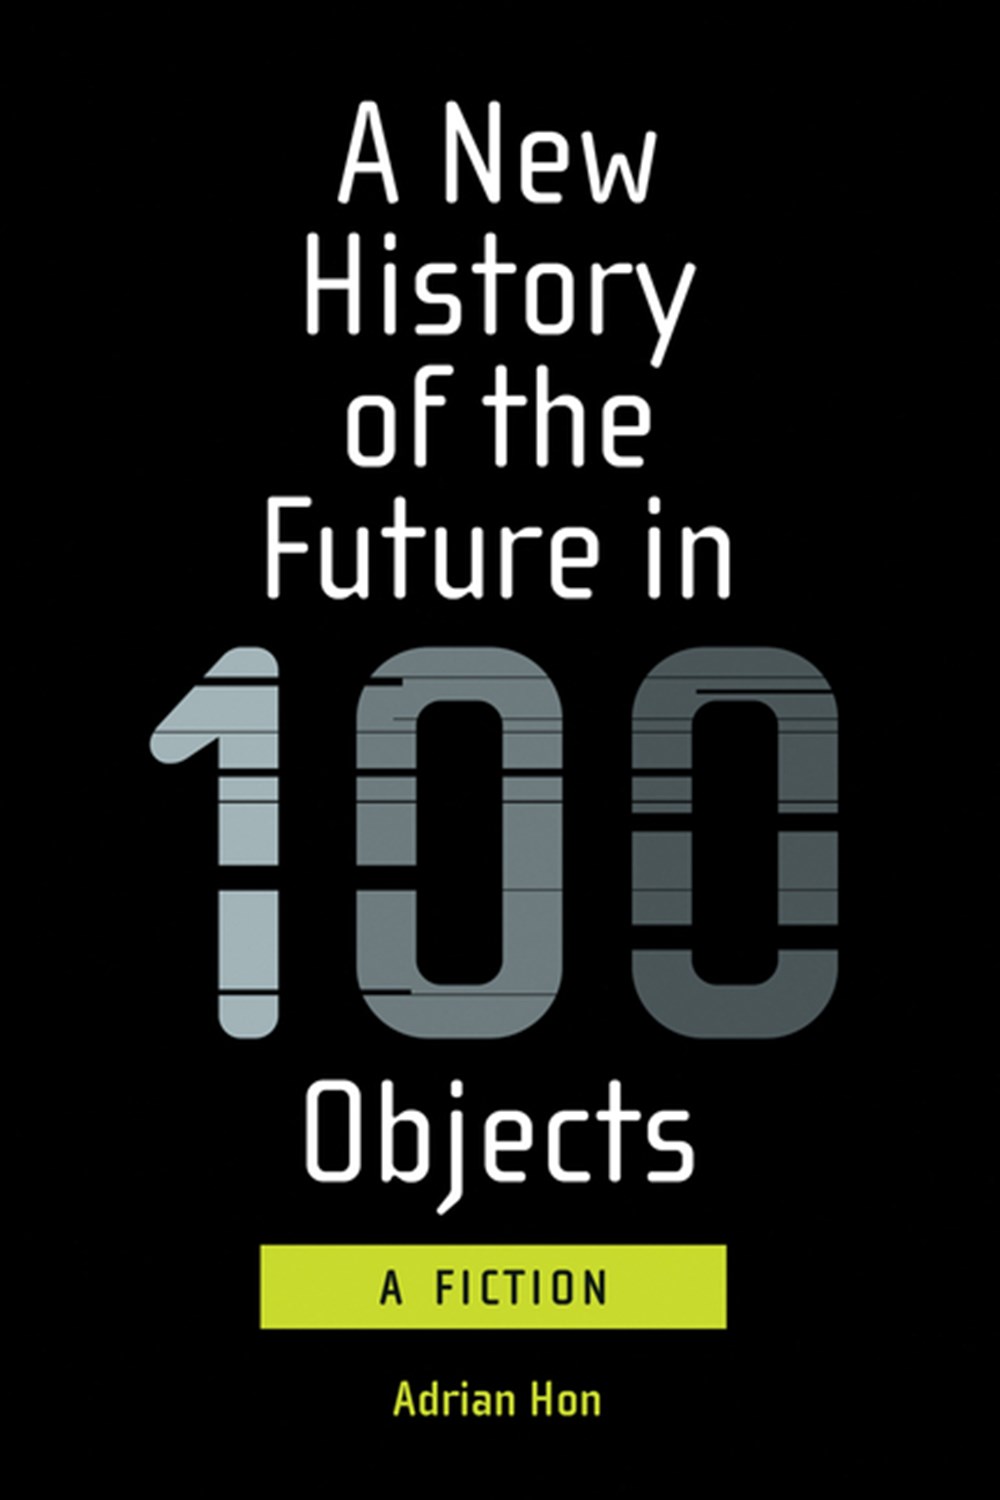 New History of the Future in 100 Objects: A Fiction